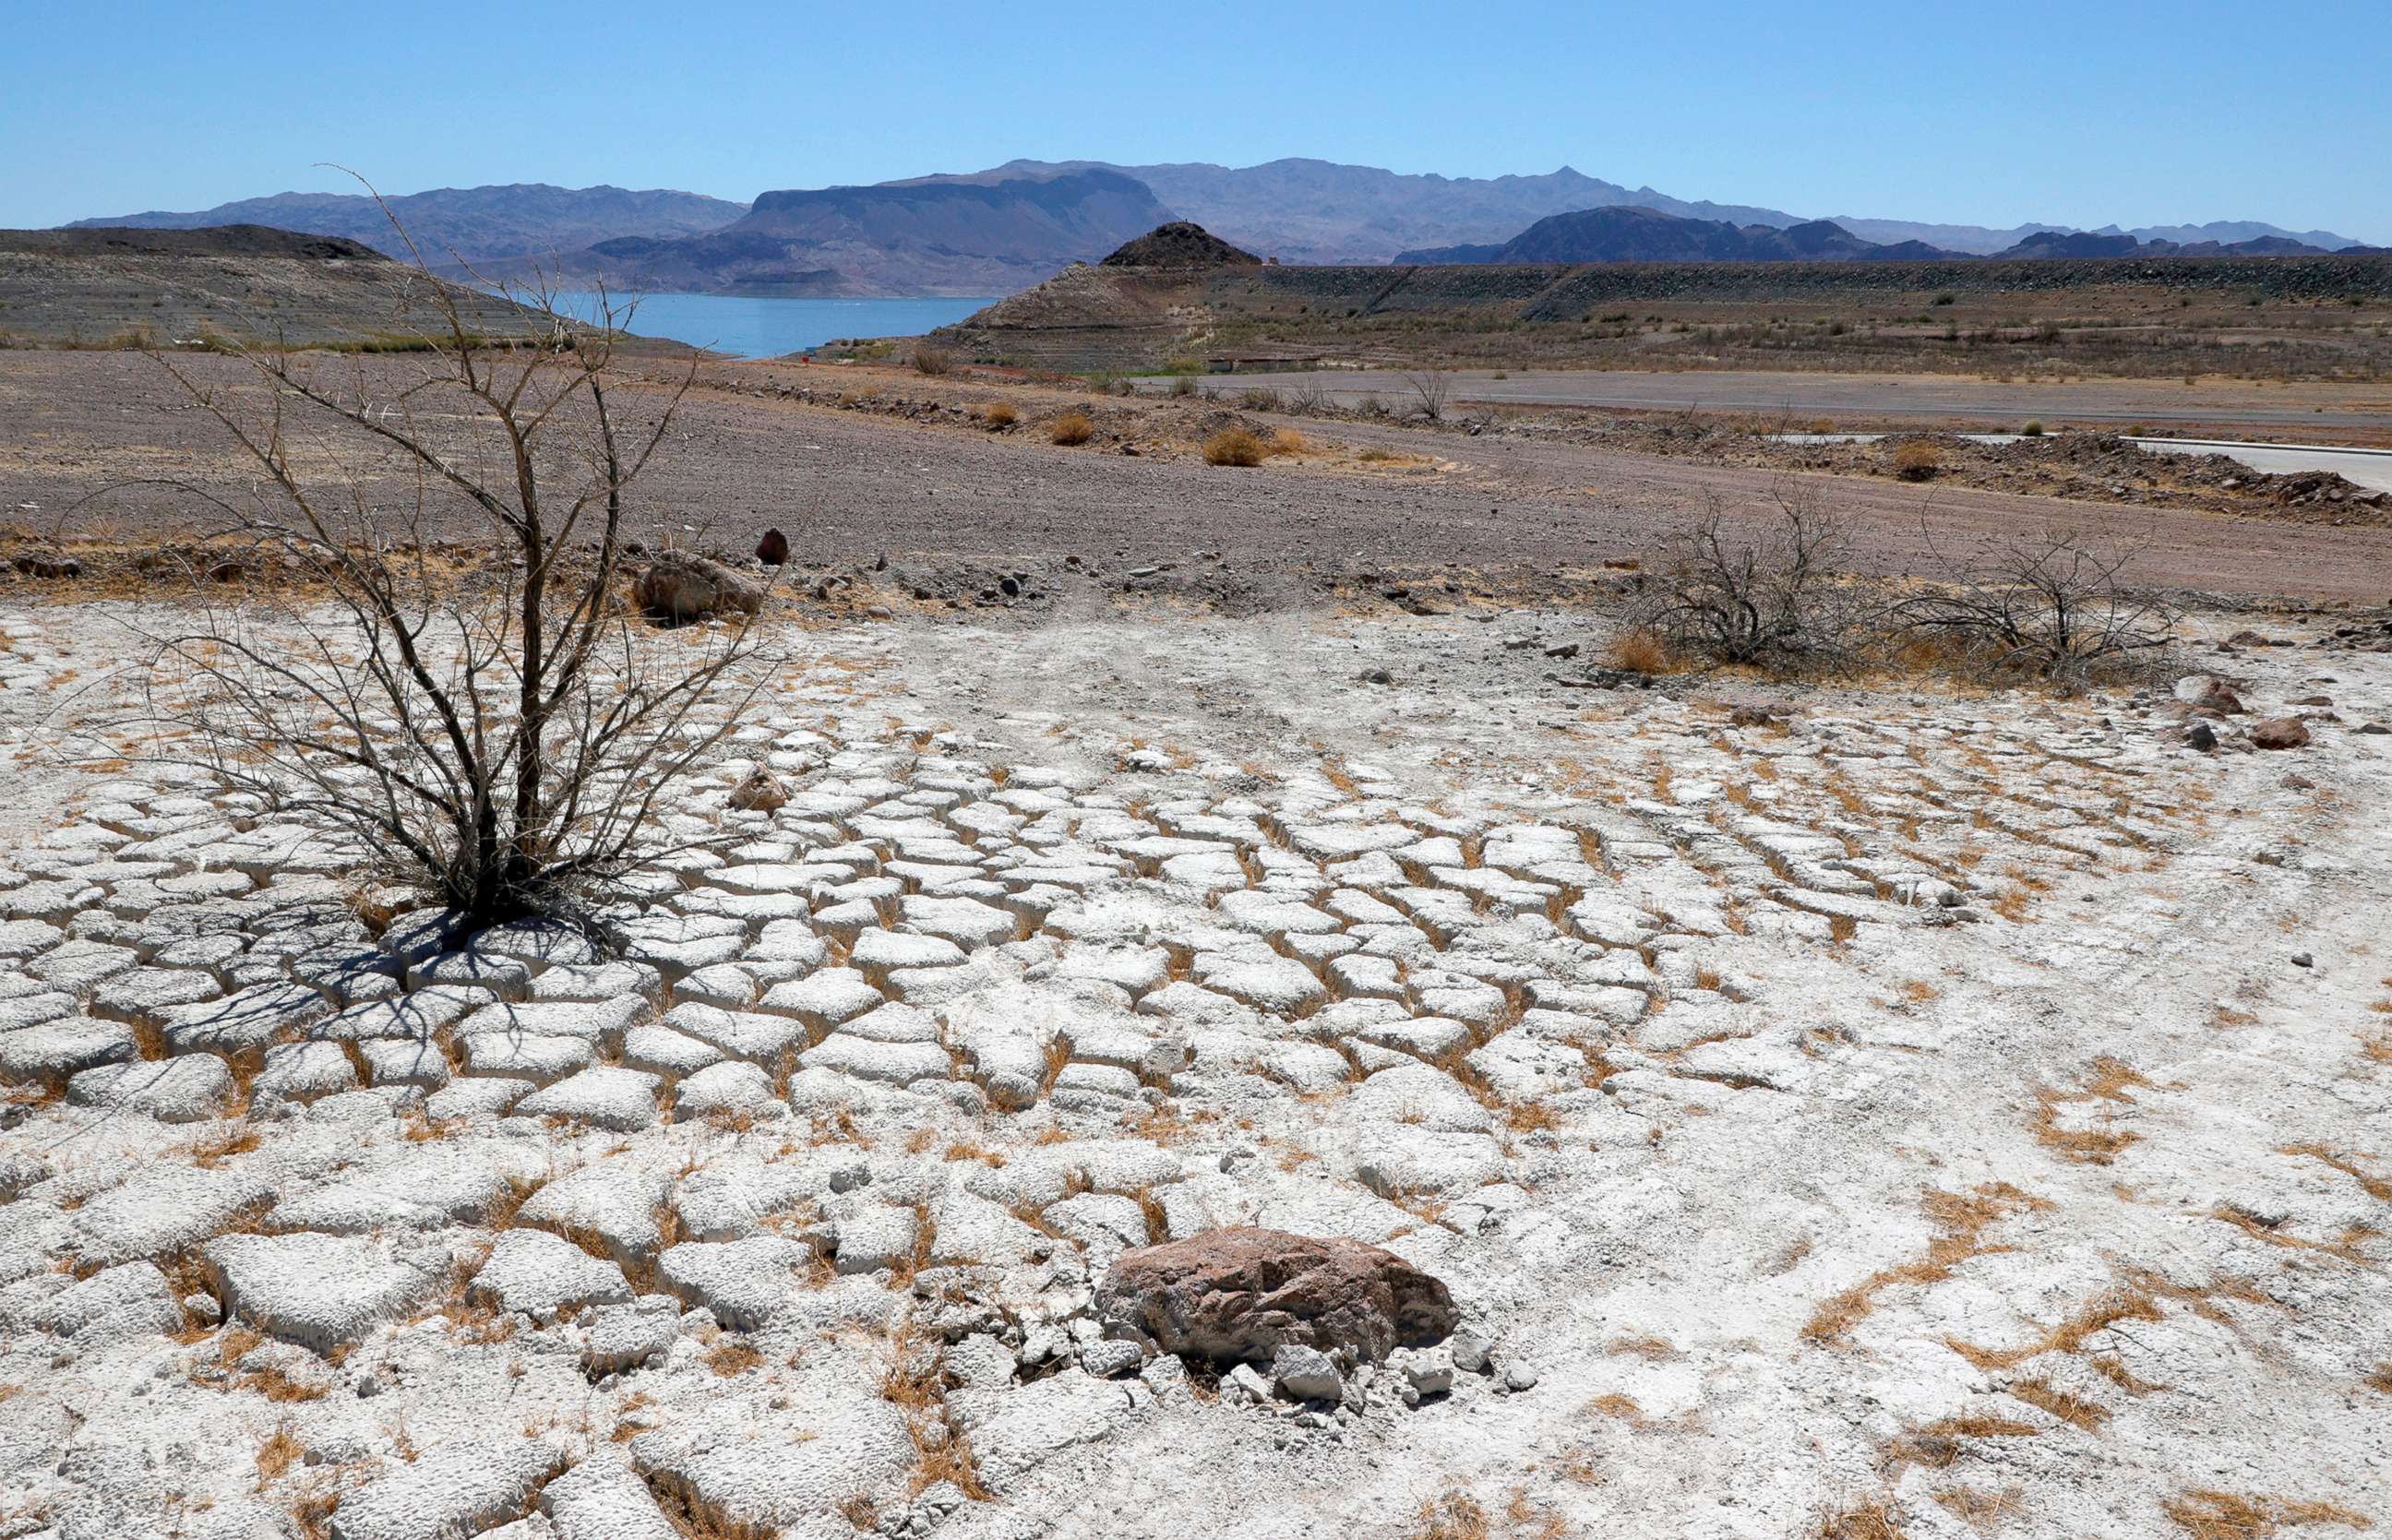 PHOTO: Lake Mead is seen in the distance behind a dead creosote bush in an area of dry, cracked earth that used to be underwater near where the Lake Mead Marina was once located on June 12, 2021 in the Lake Mead National Recreation Area, Nevada.